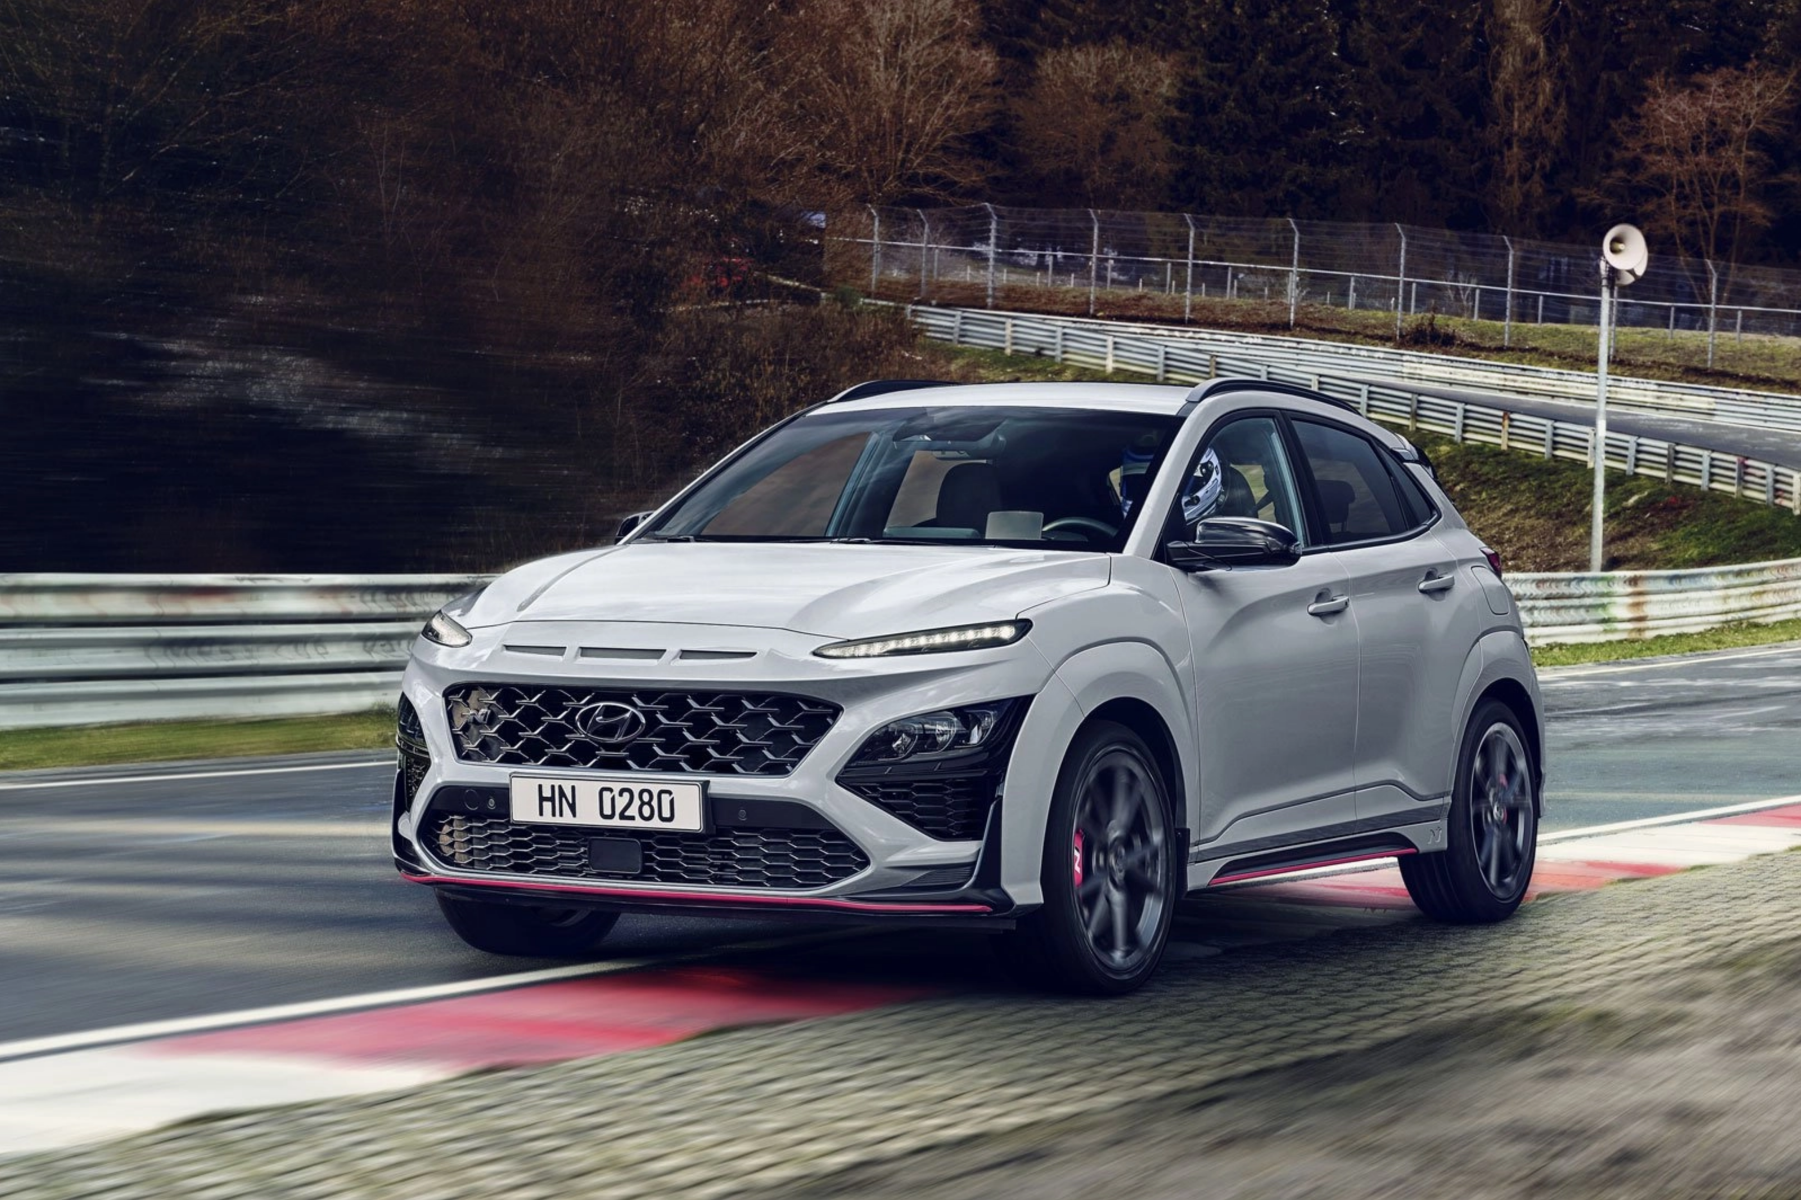 The all-new 2022 Hyundai Kona N has enthusiasts excited